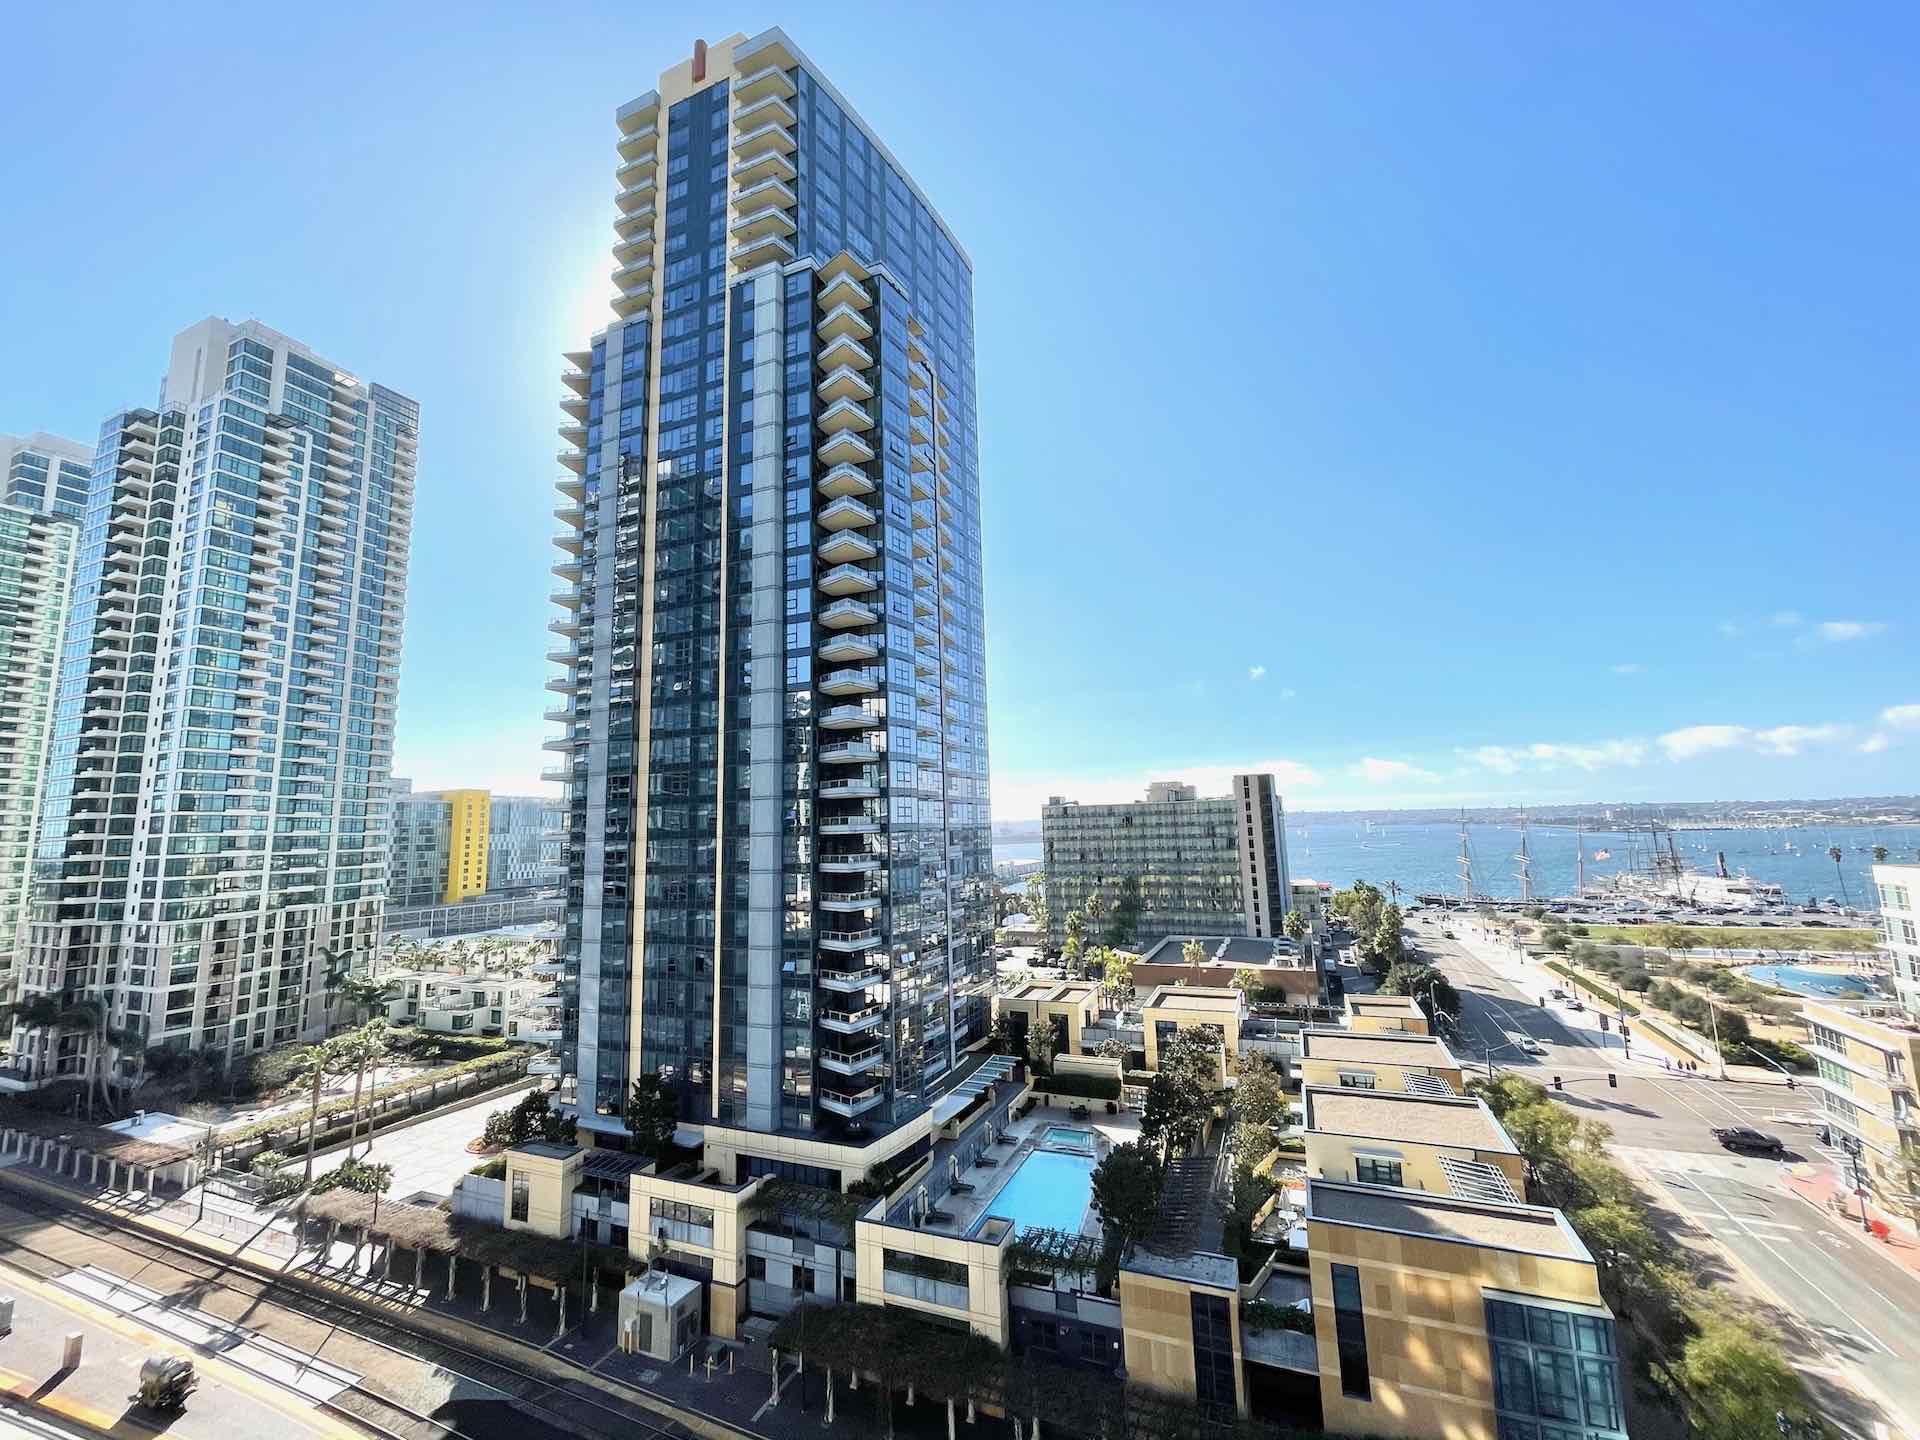 Bayside condos in the Columbia District of downtown San Diego